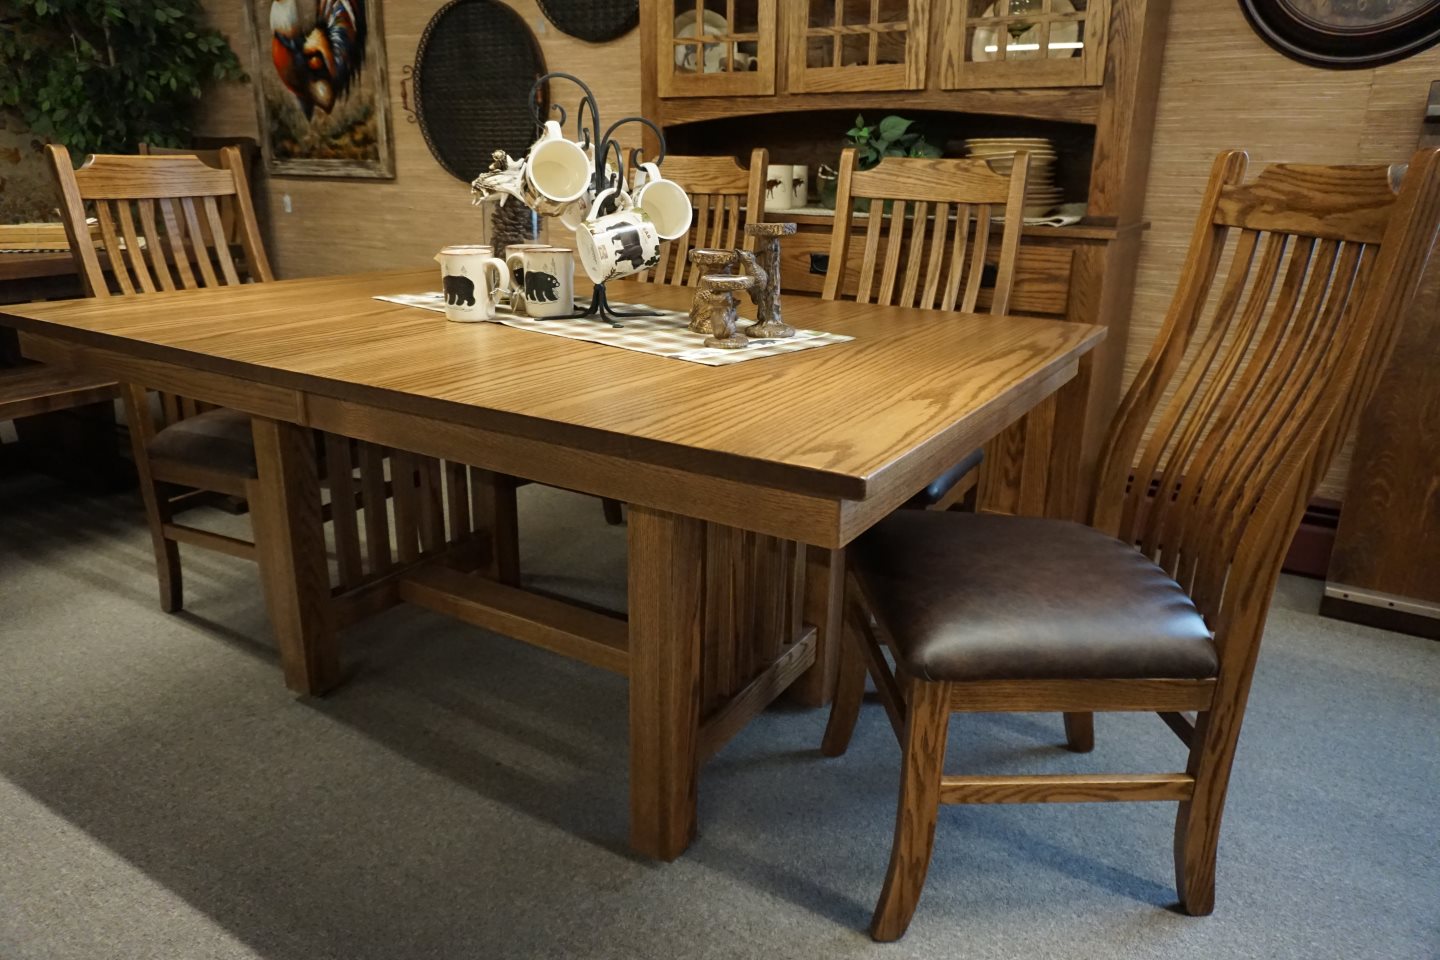 Amish - Standard Mission Table & Mission Slat Chairs